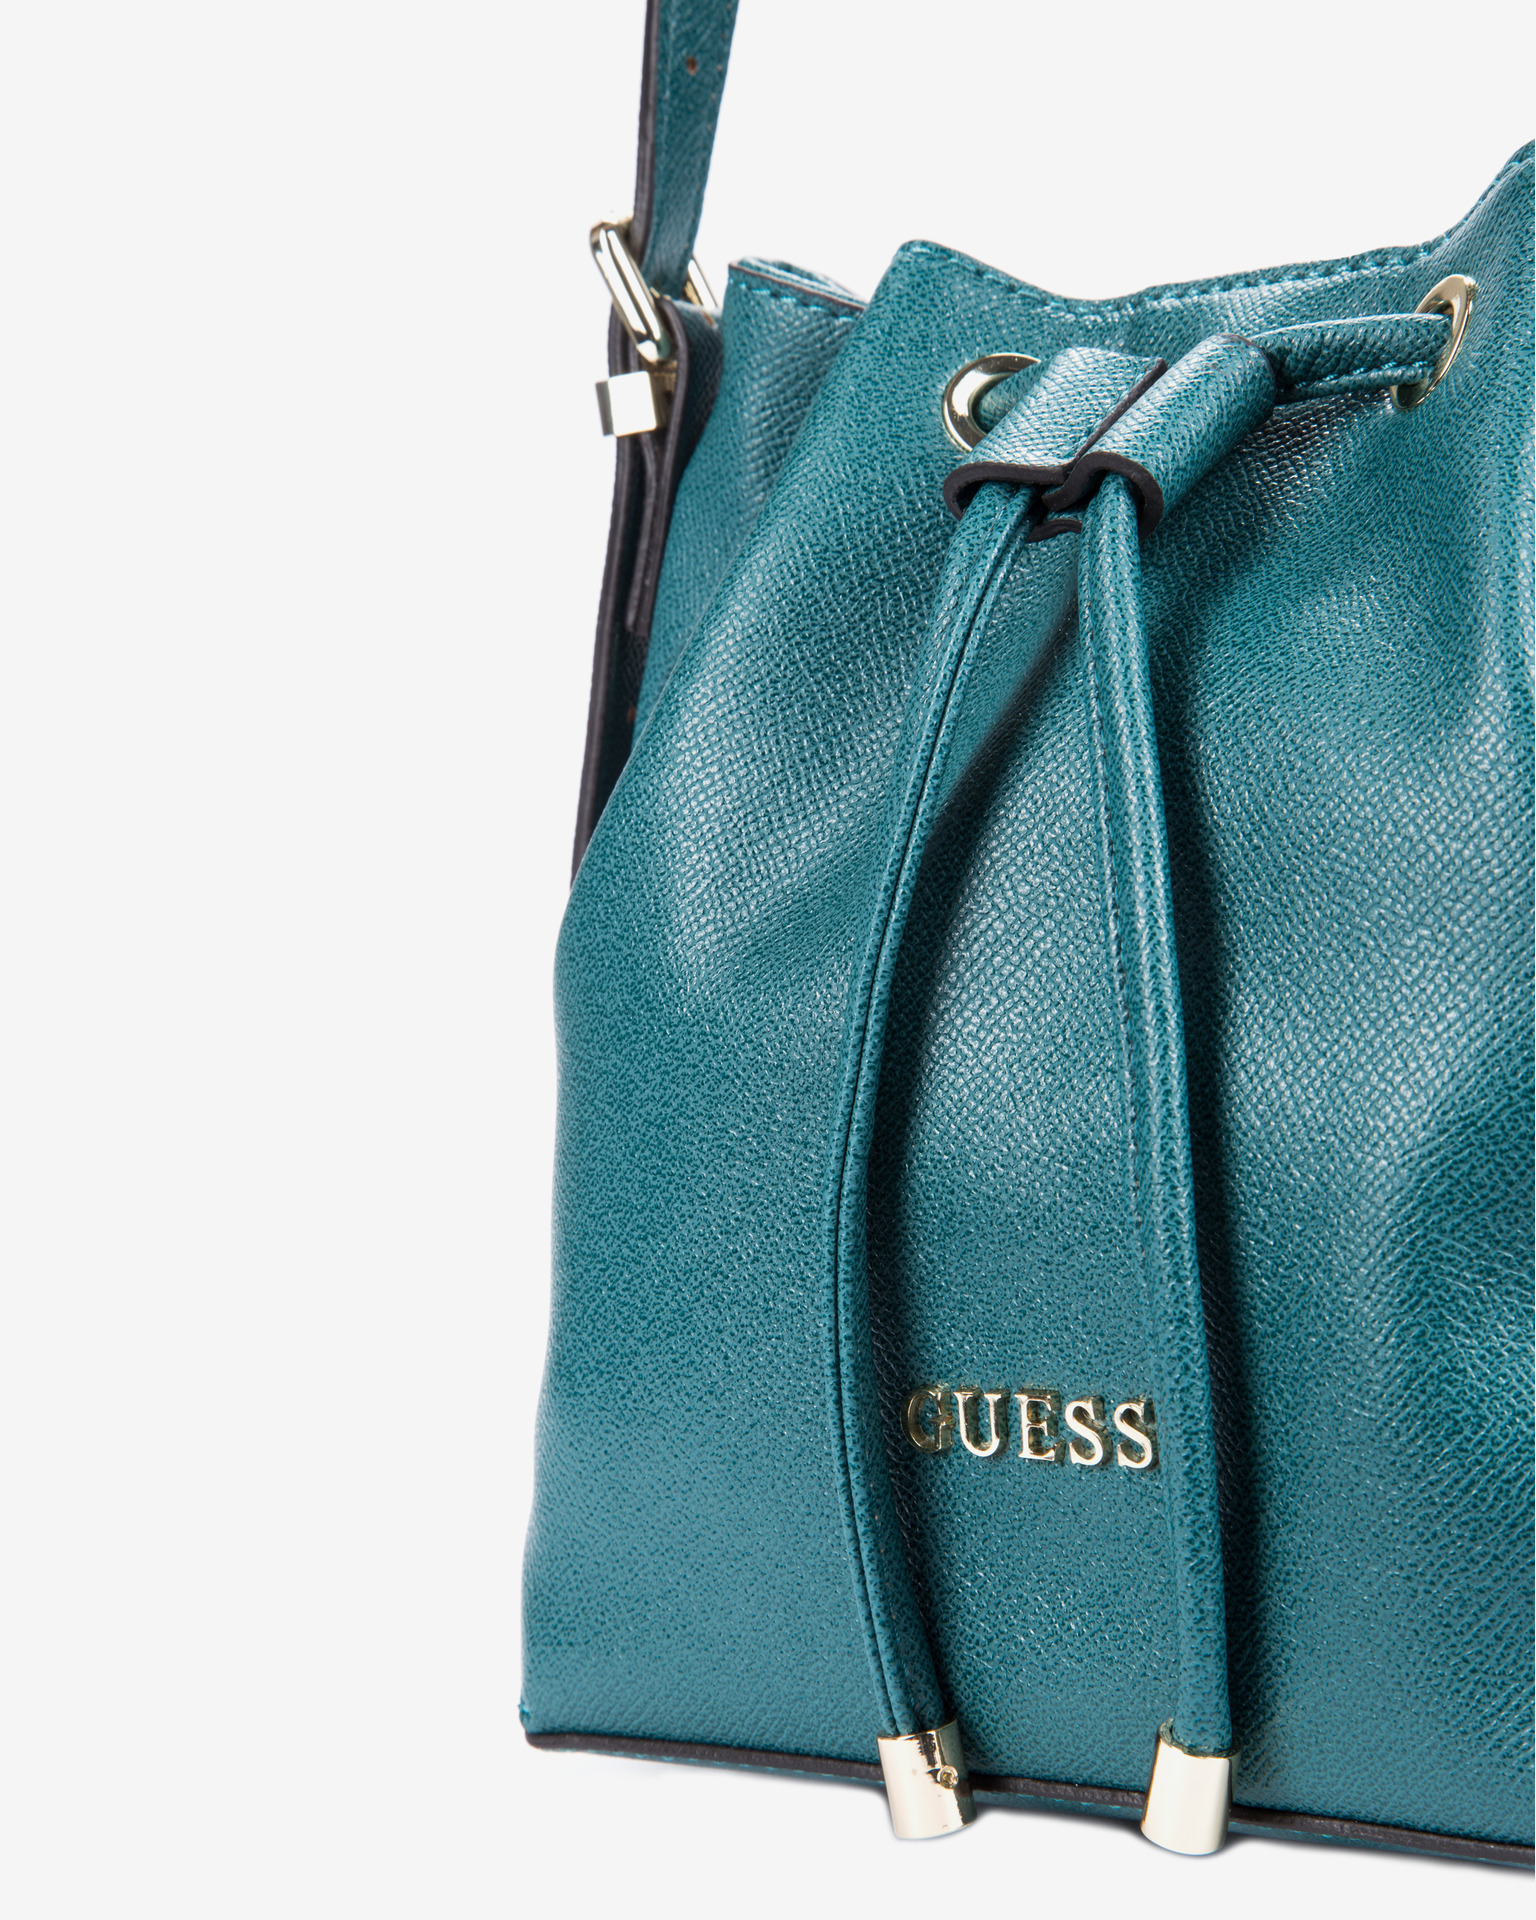 Guess Noelle Elite Tote Purse - Women's Bags in Turquoise